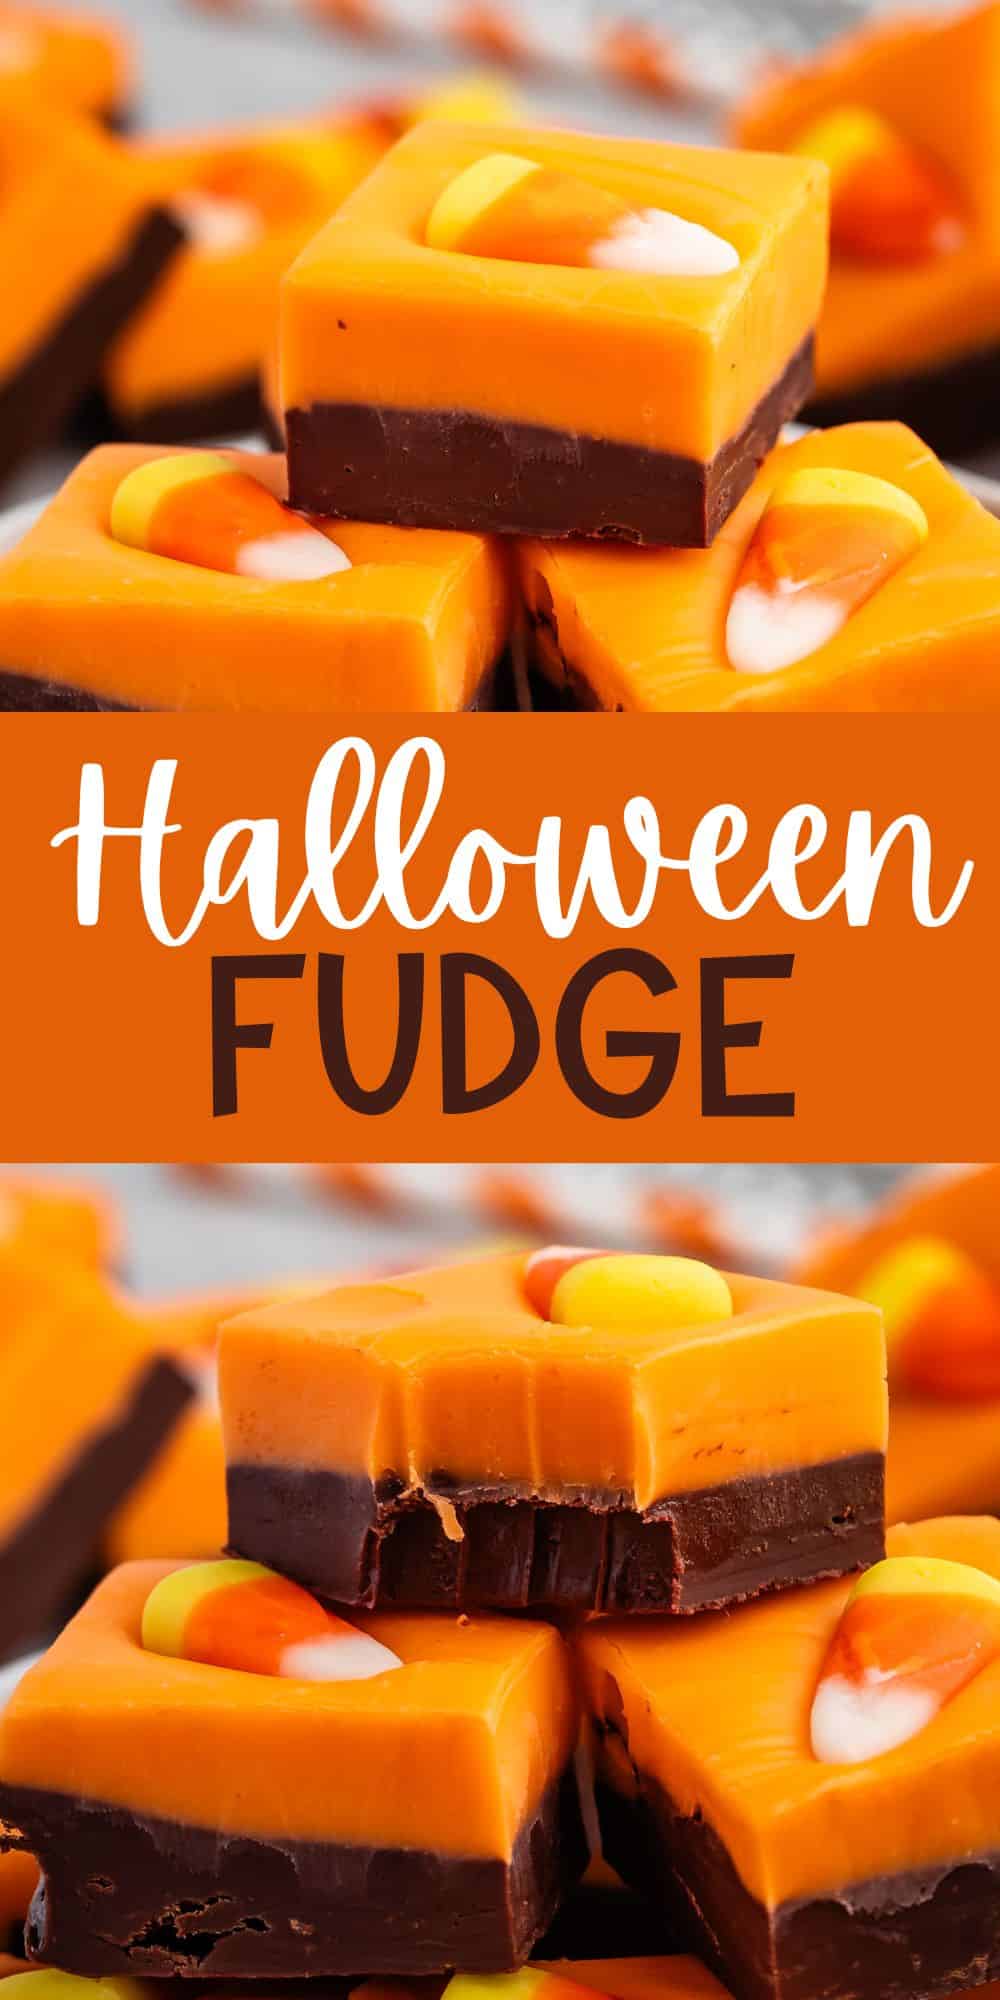 two photos of stacked brown and orange fudge with a candy corn on top with words on the image.